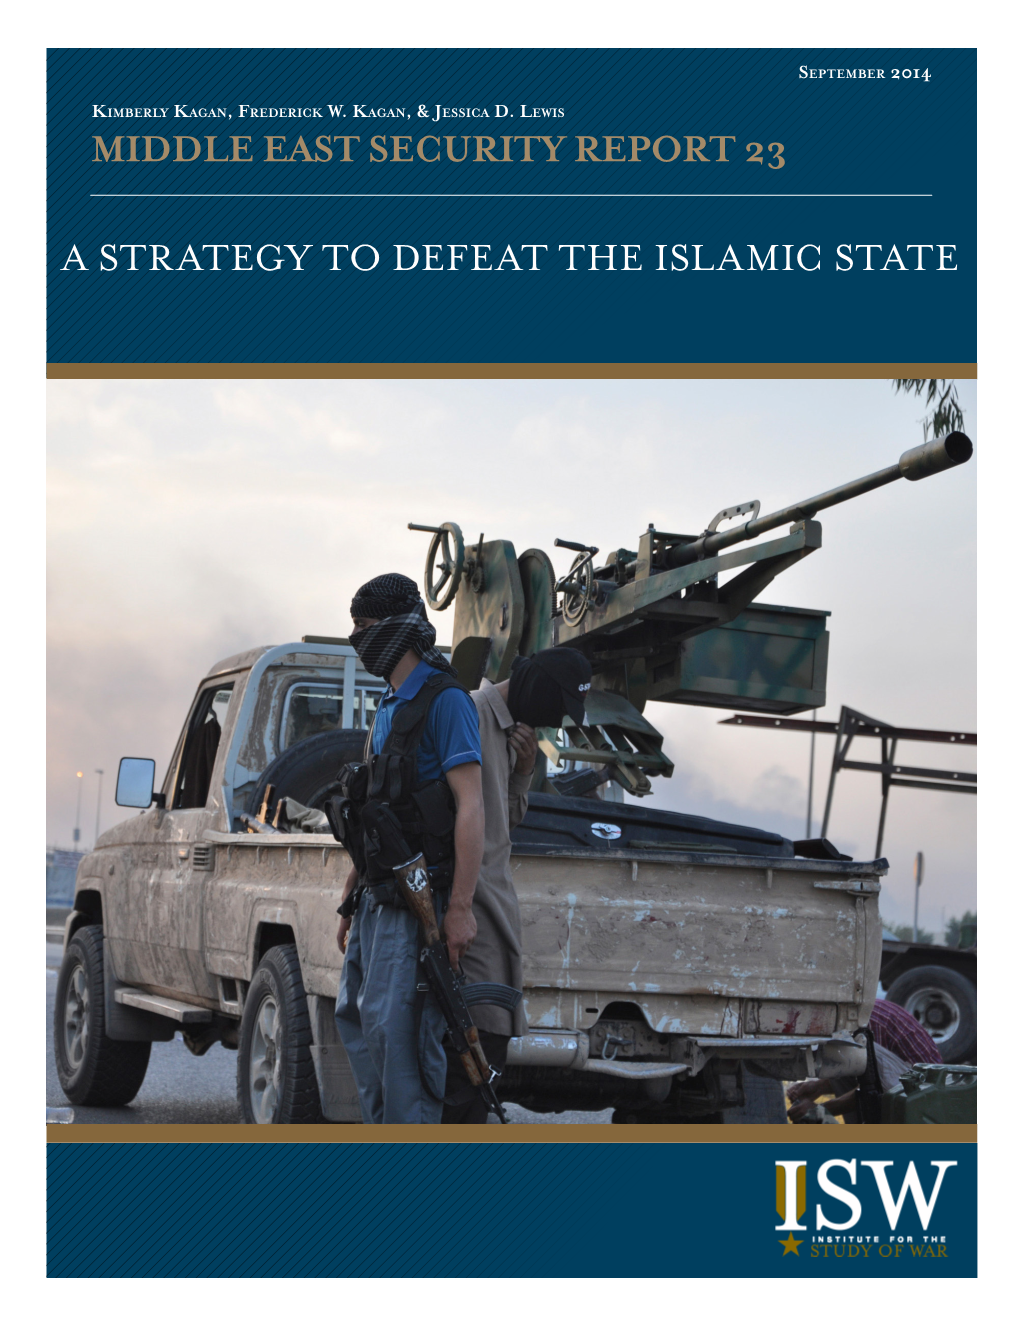 MIDDLE EAST SECURITY REPORT 23 a Strategy to Defeat the Islamic State